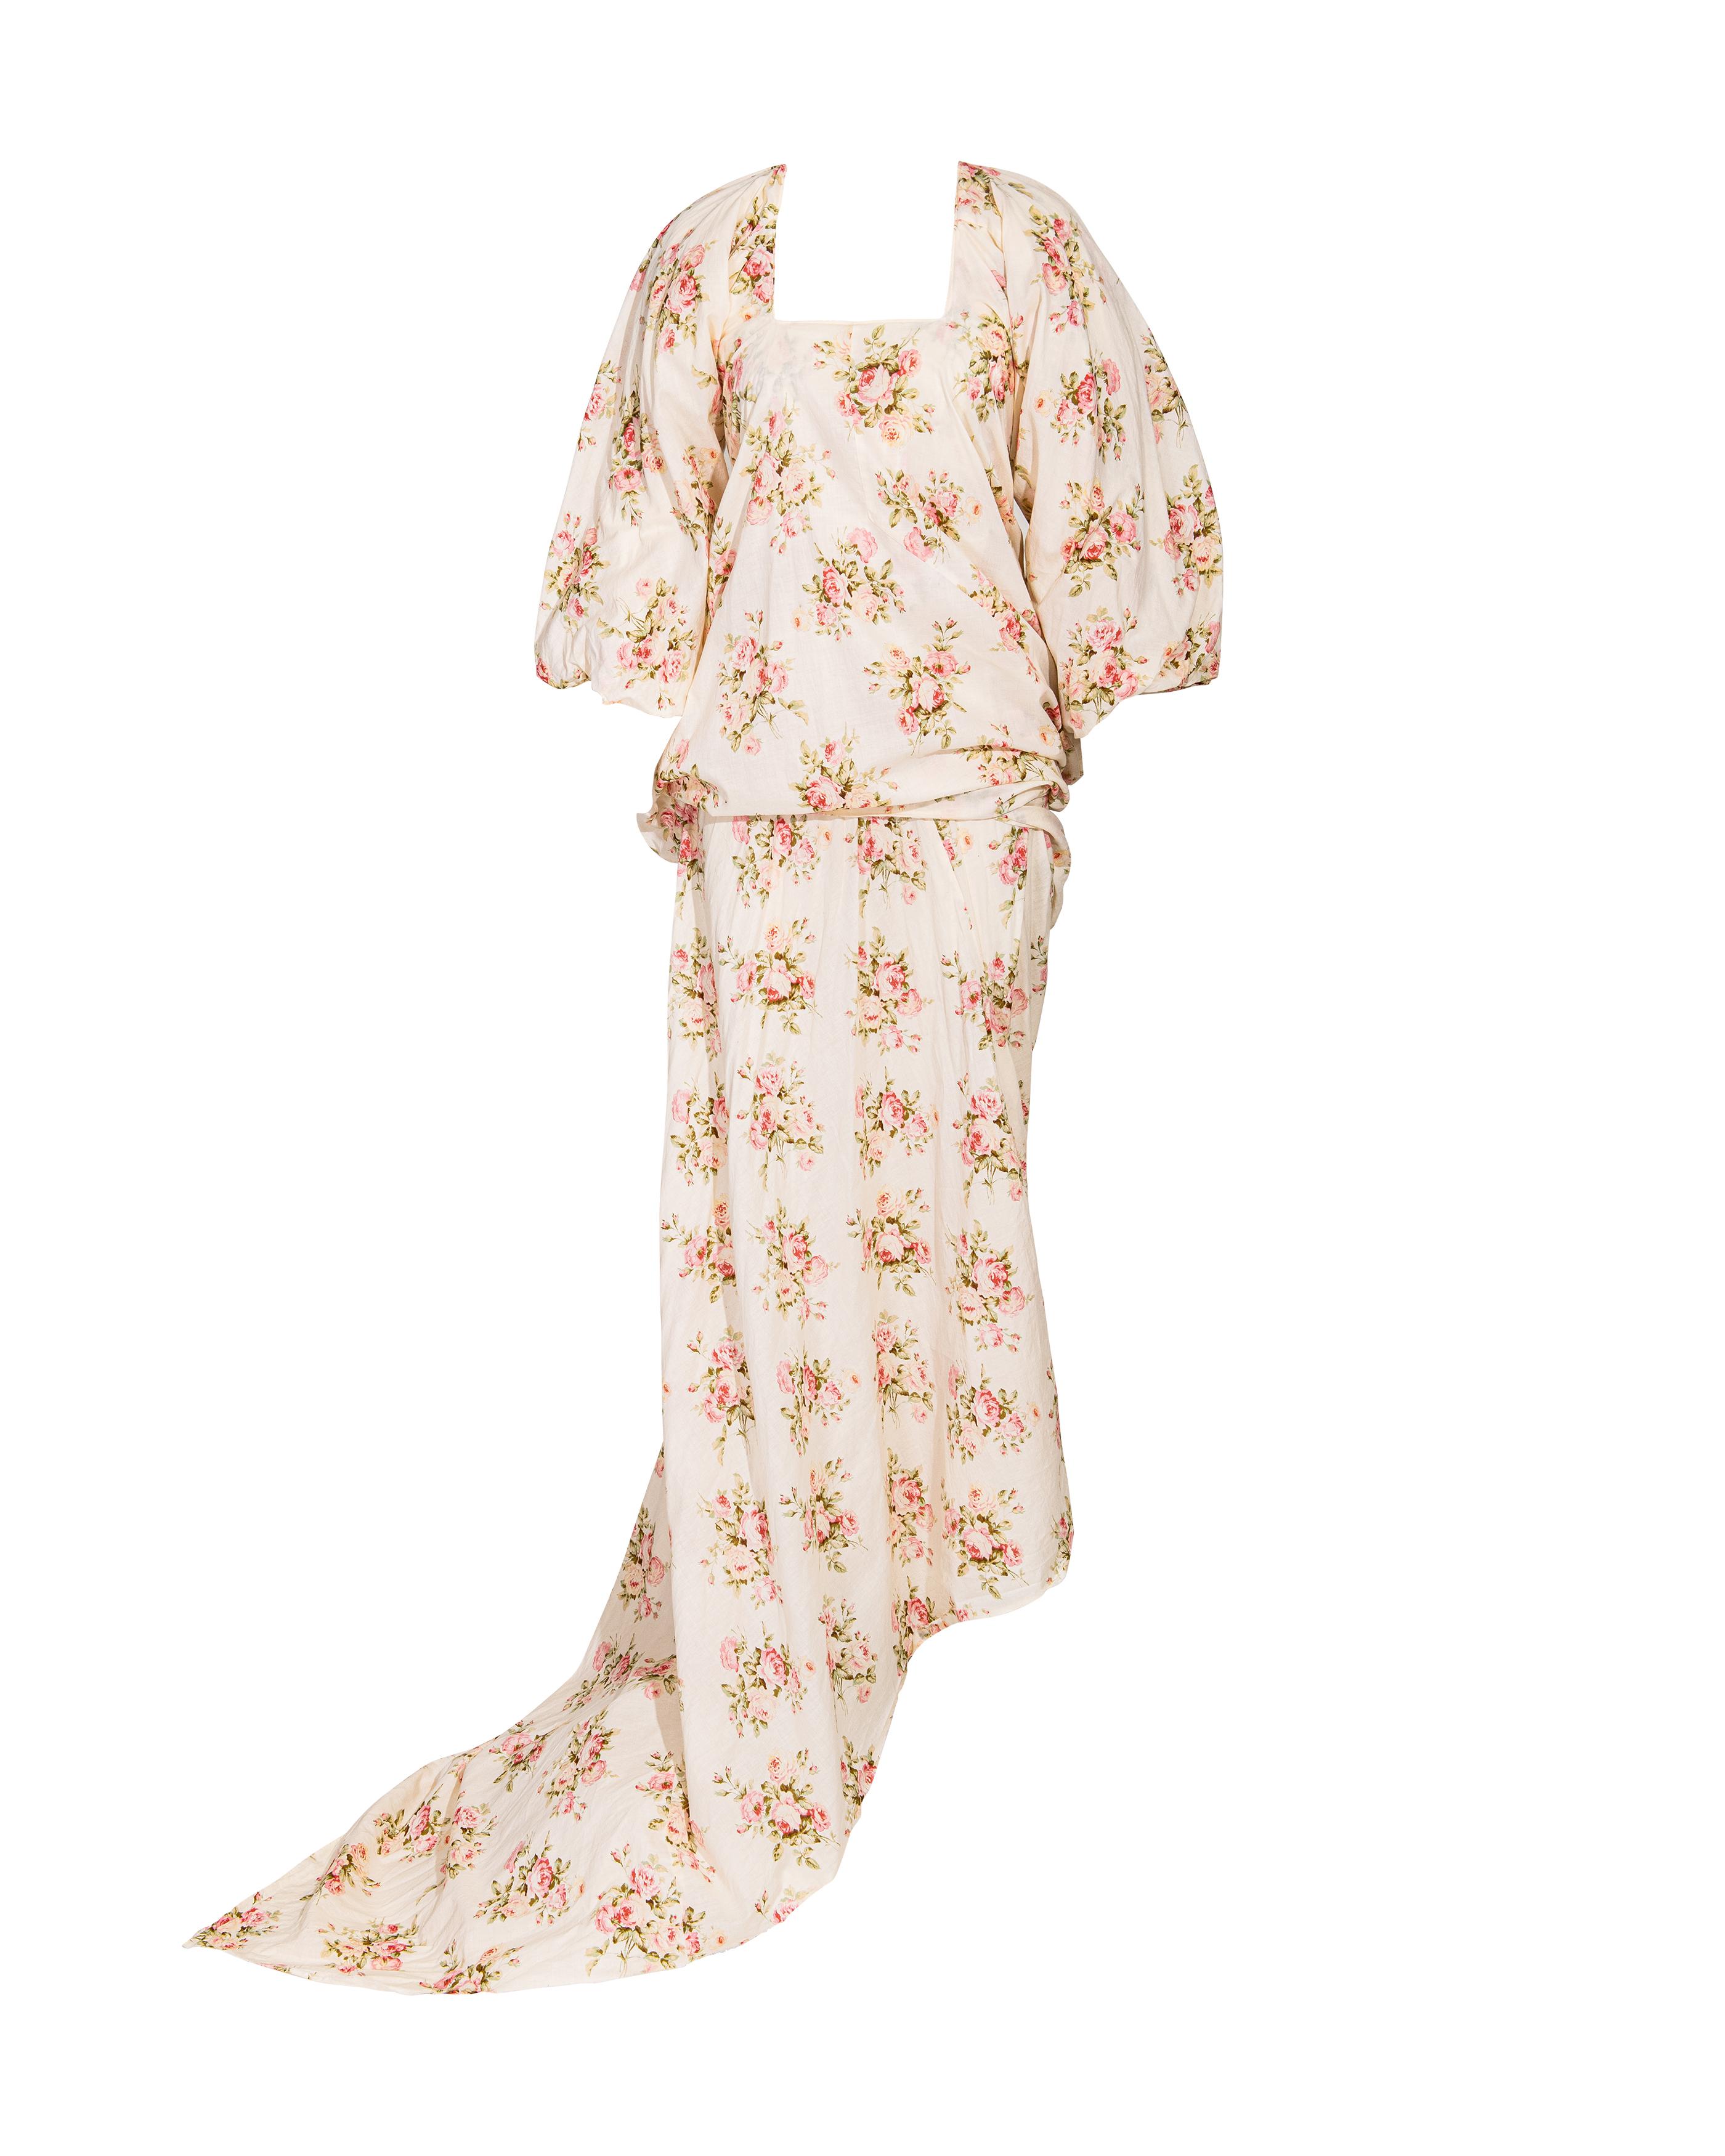 S/S 2008 Junya Watanabe Ecru Cotton Dress with Pink Floral Pattern For Sale 5